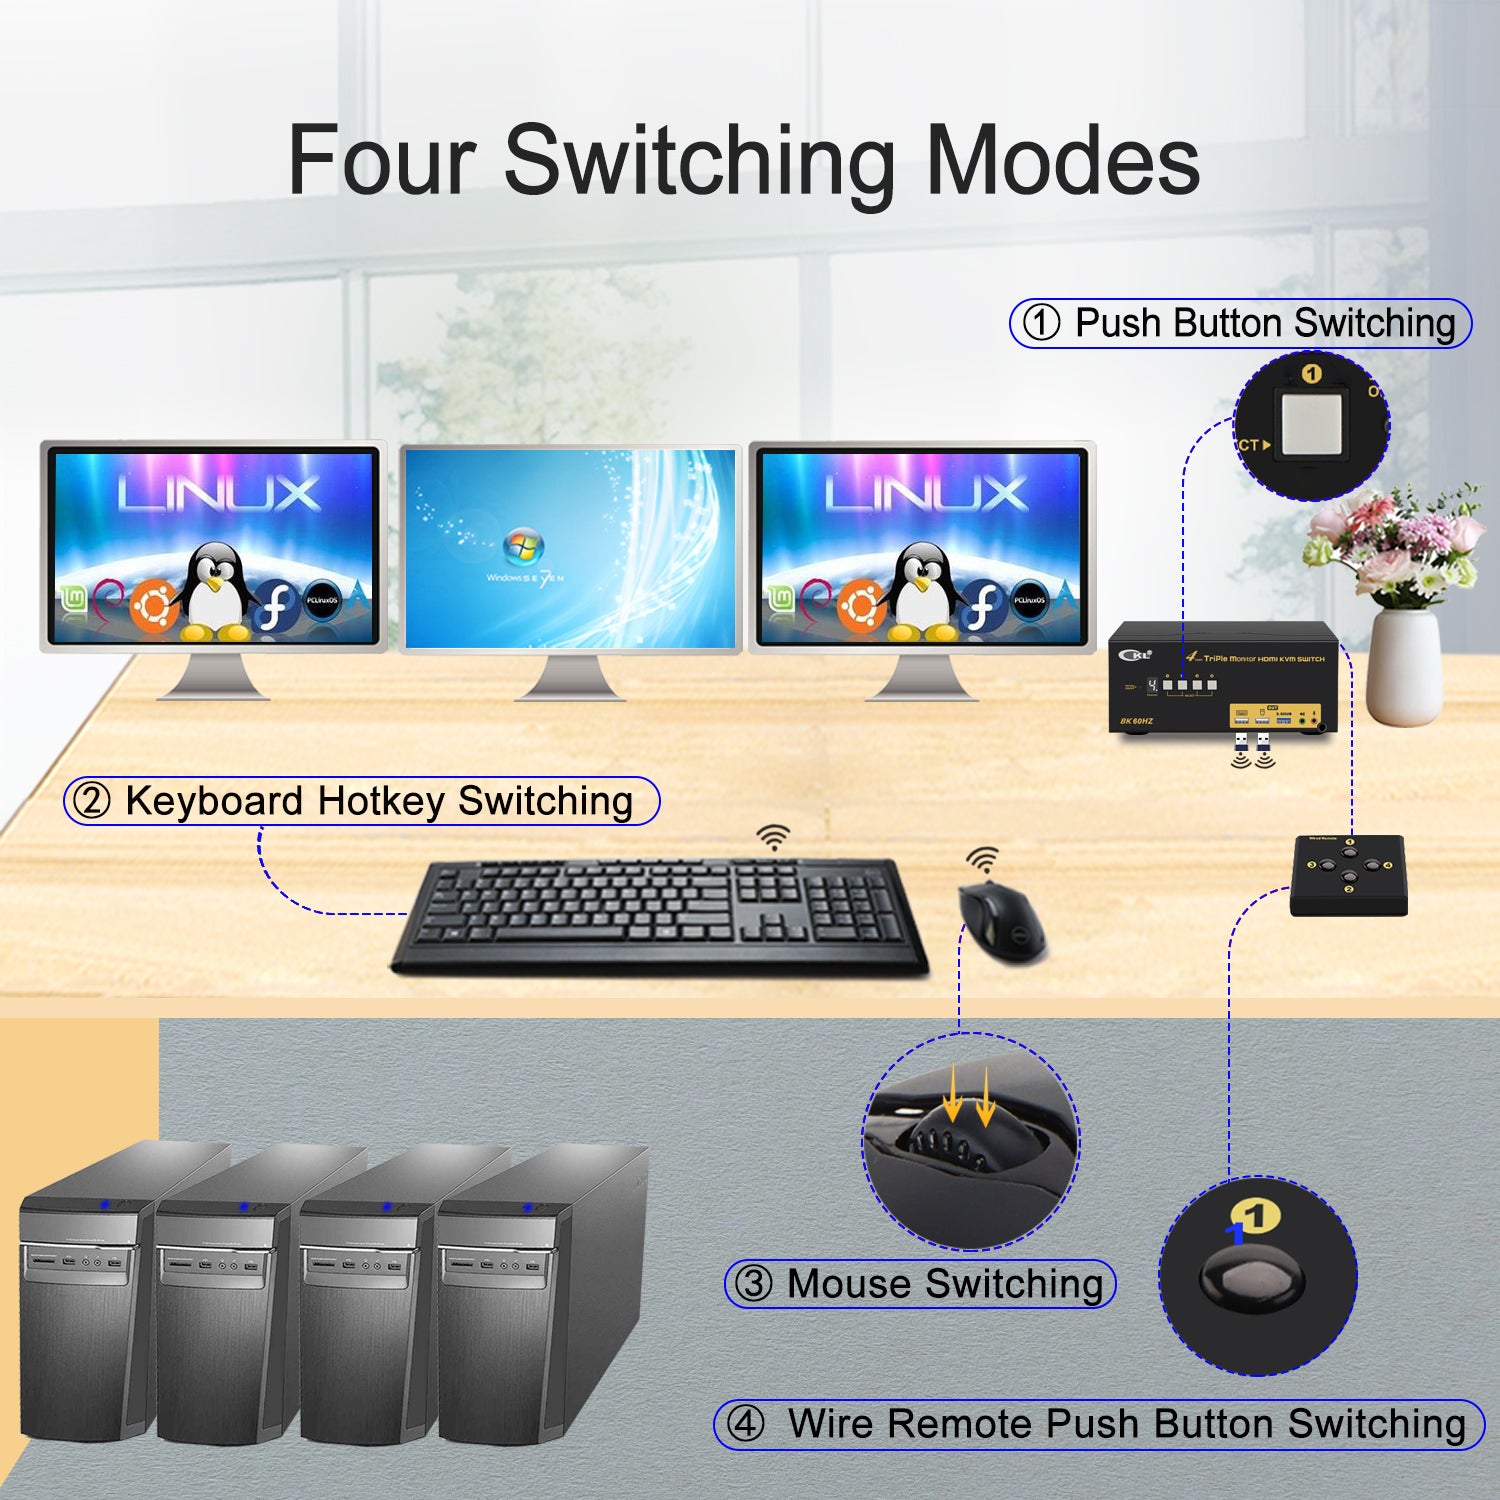 CKL 4 Port Triple Monitor USB 3.0 KVM Switch HDMI 2.1 8K 60Hz 4K 120Hz 144Hz with EDID, PC Screen Keyboard Mouse Peripheral Audio Sharing Selector Box for 4 Computers 3 Monitors (943HUA-5)